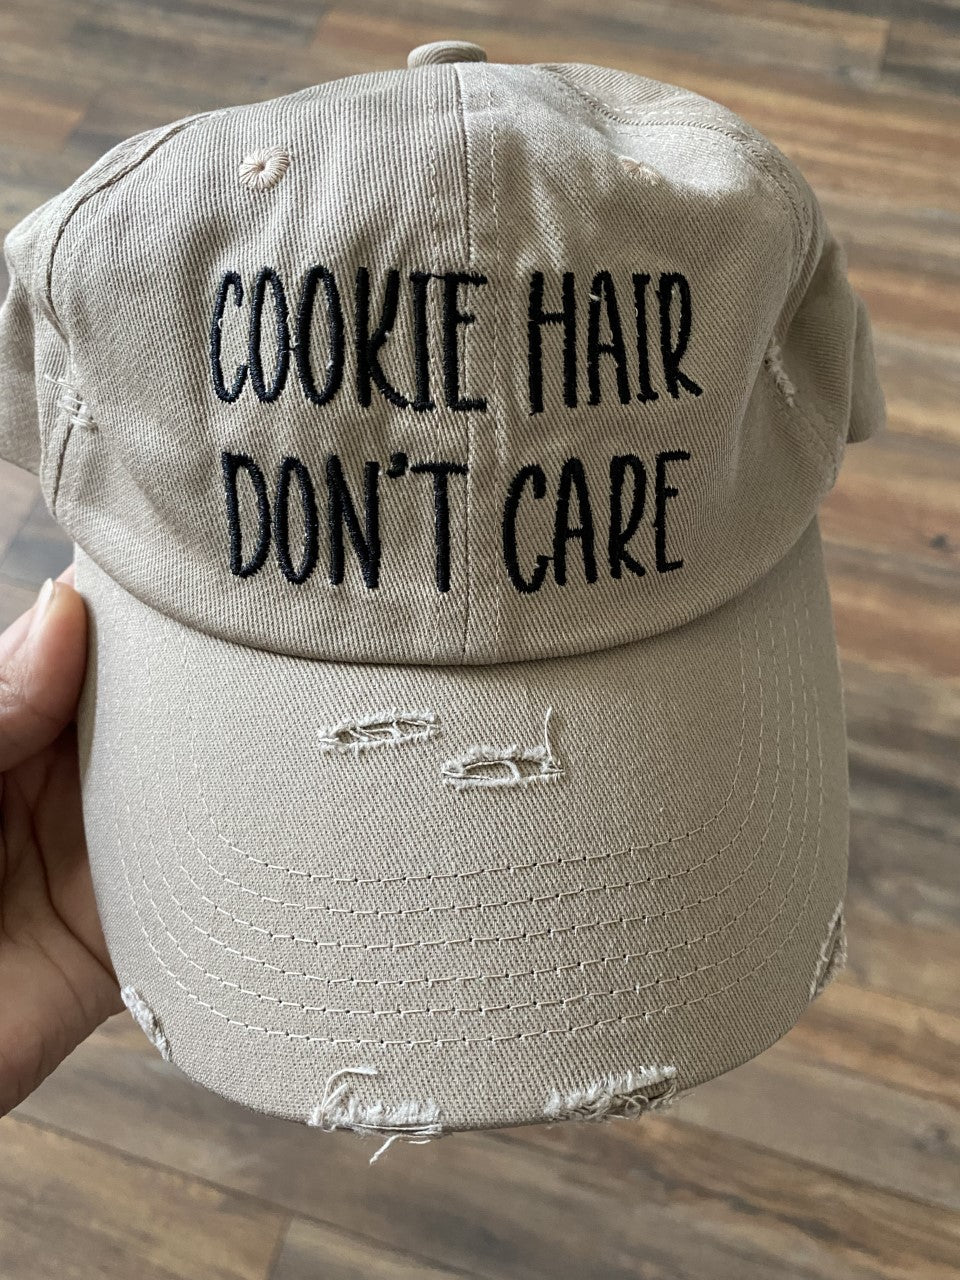 Cookie Hair Don't Care Distressed Cap